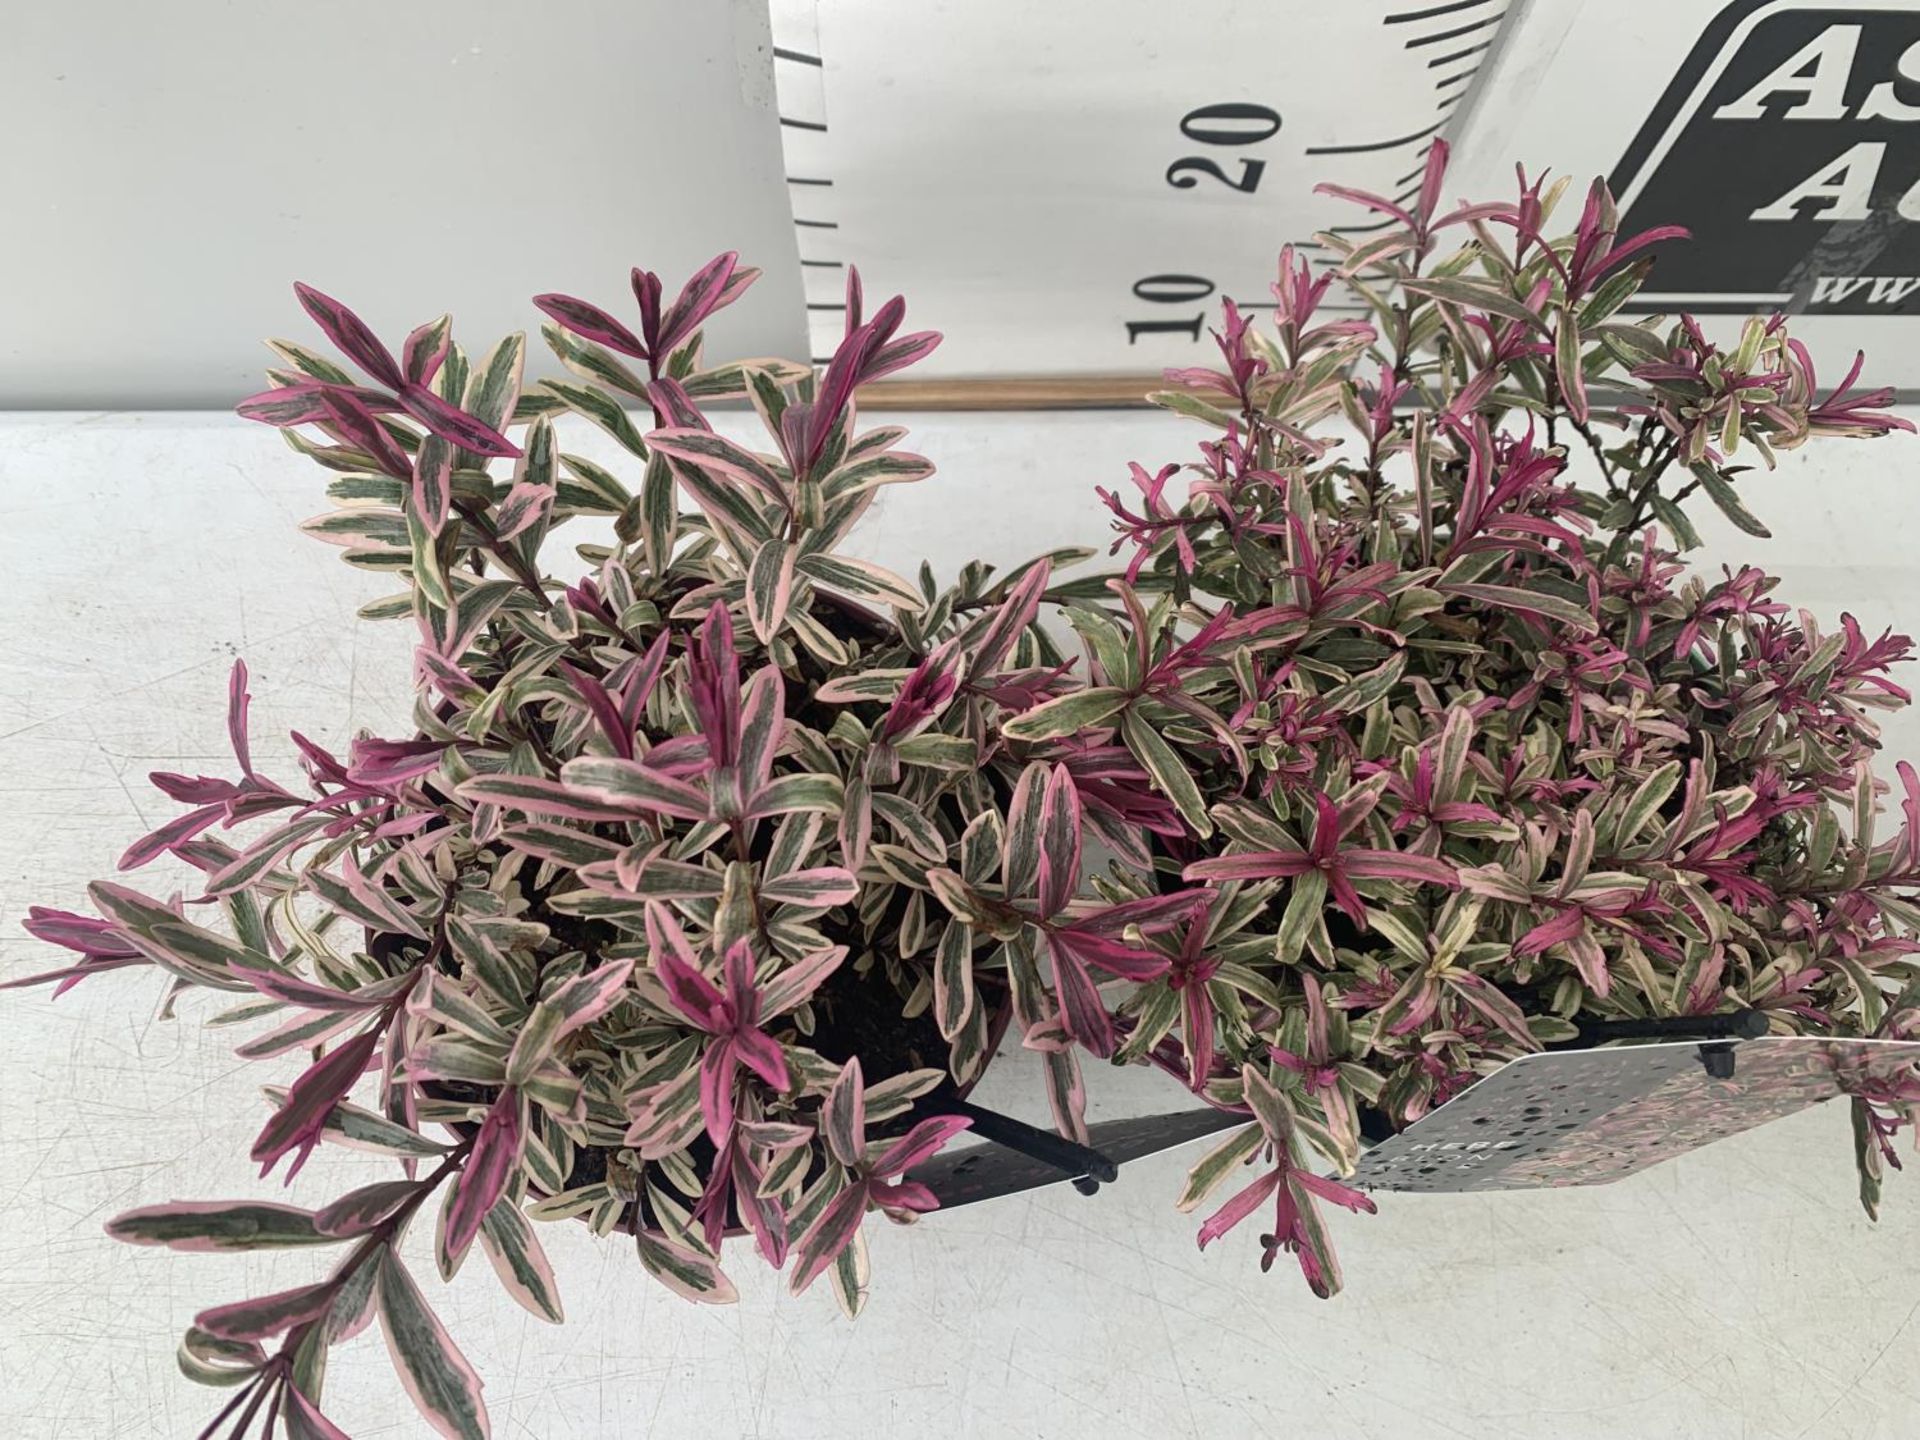 TWO HEBES BLONDIE AND HEARTBREAKER IN 2 LTR POTS HEIGHT 30CM PLUS VAT TO BE SOLD FOR THE TWO - Image 2 of 5